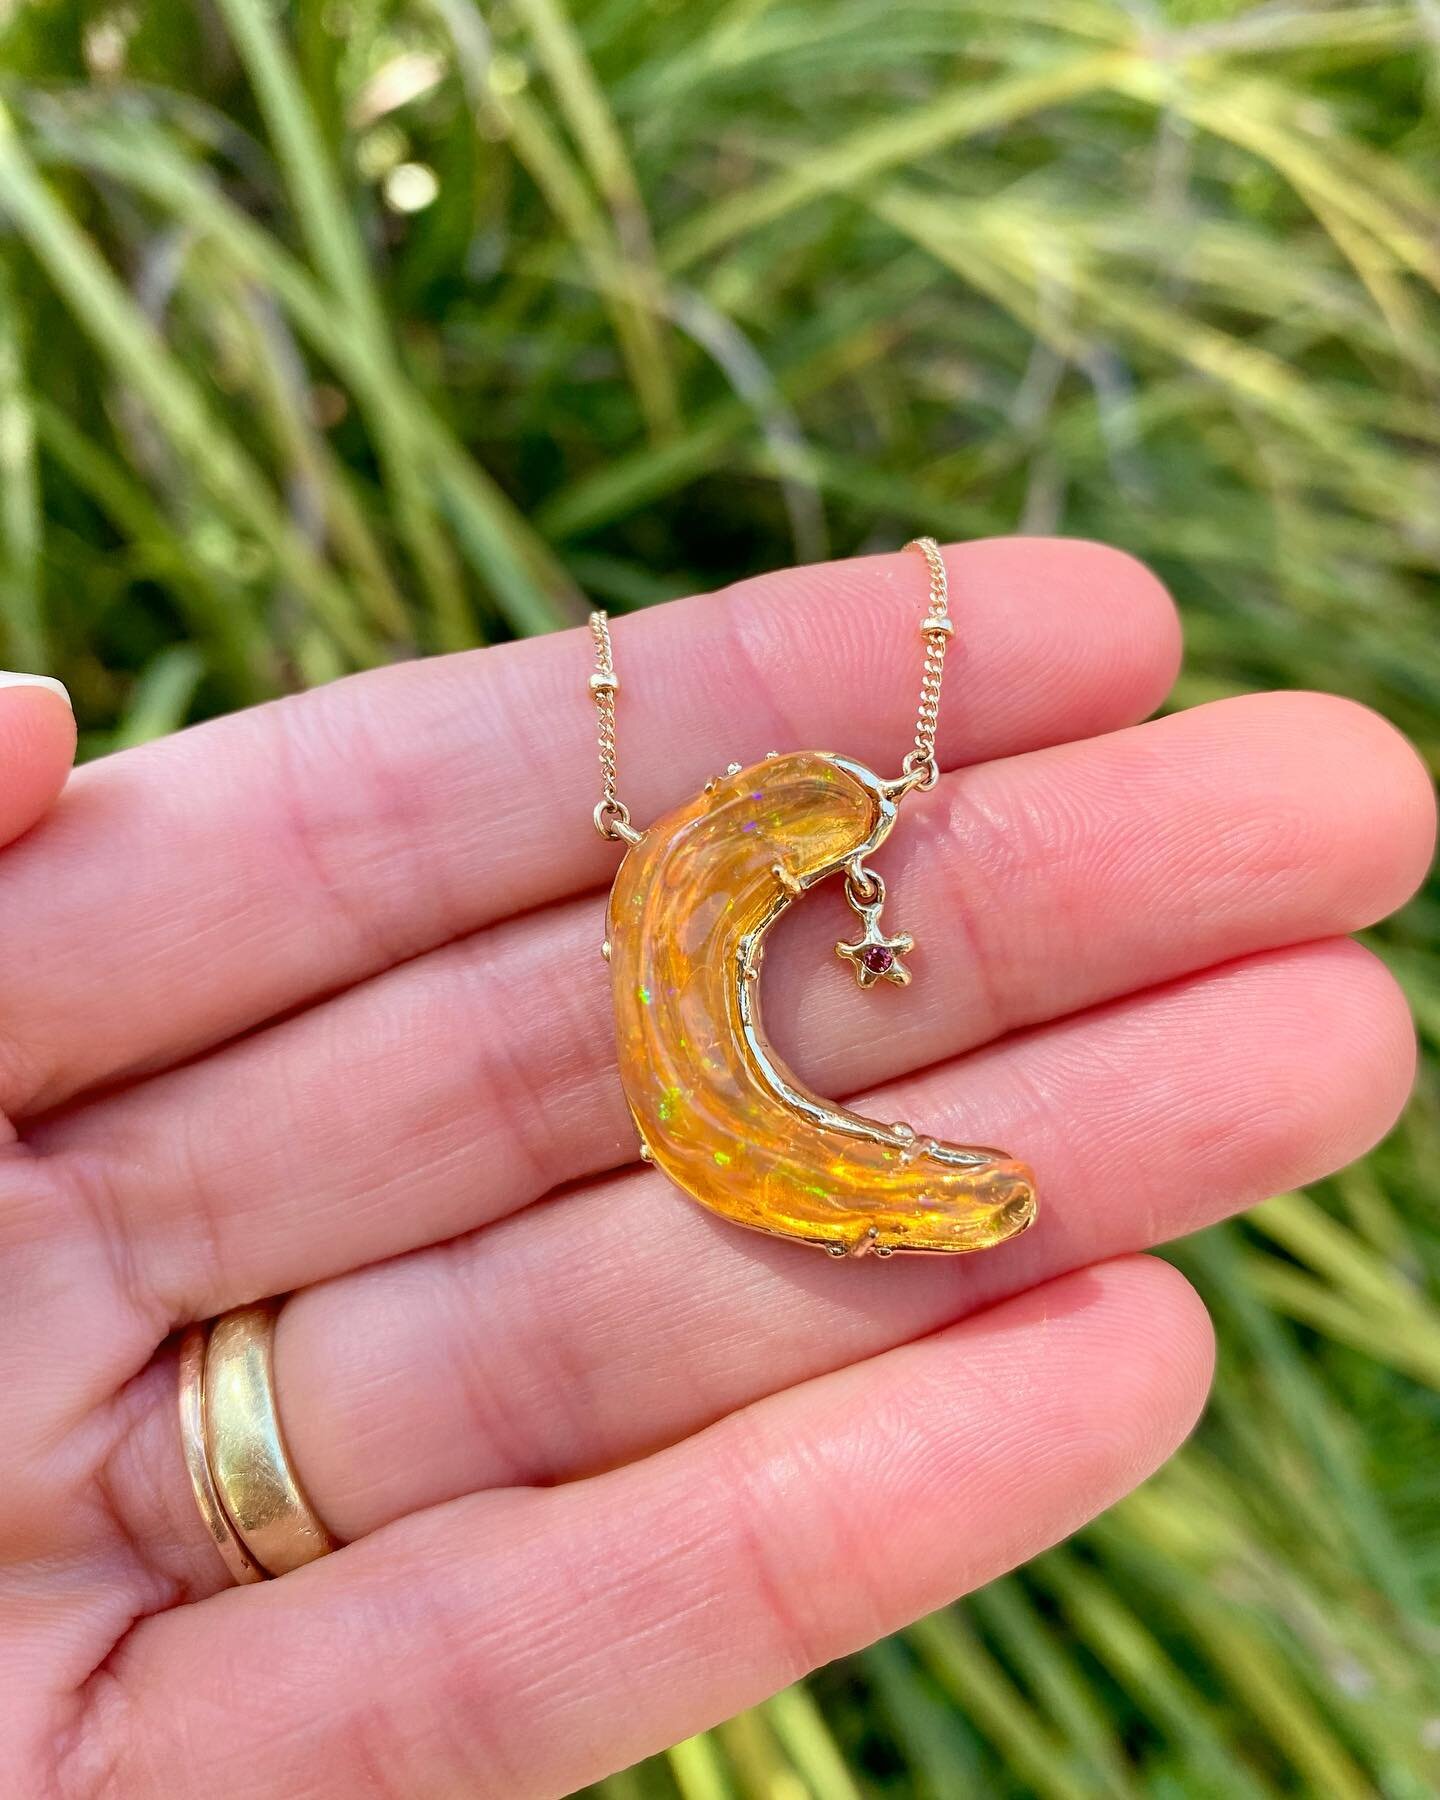 The Golden Hour Tidal Moon is accented with a bright red ruby dangling star to set off the dazzling crescent moon shaped Mexican fire opal 🔥🌙 Major sunset vibes!! 

Swipe right for the perfect orange poppy pairing and the detailed reverse side. I h